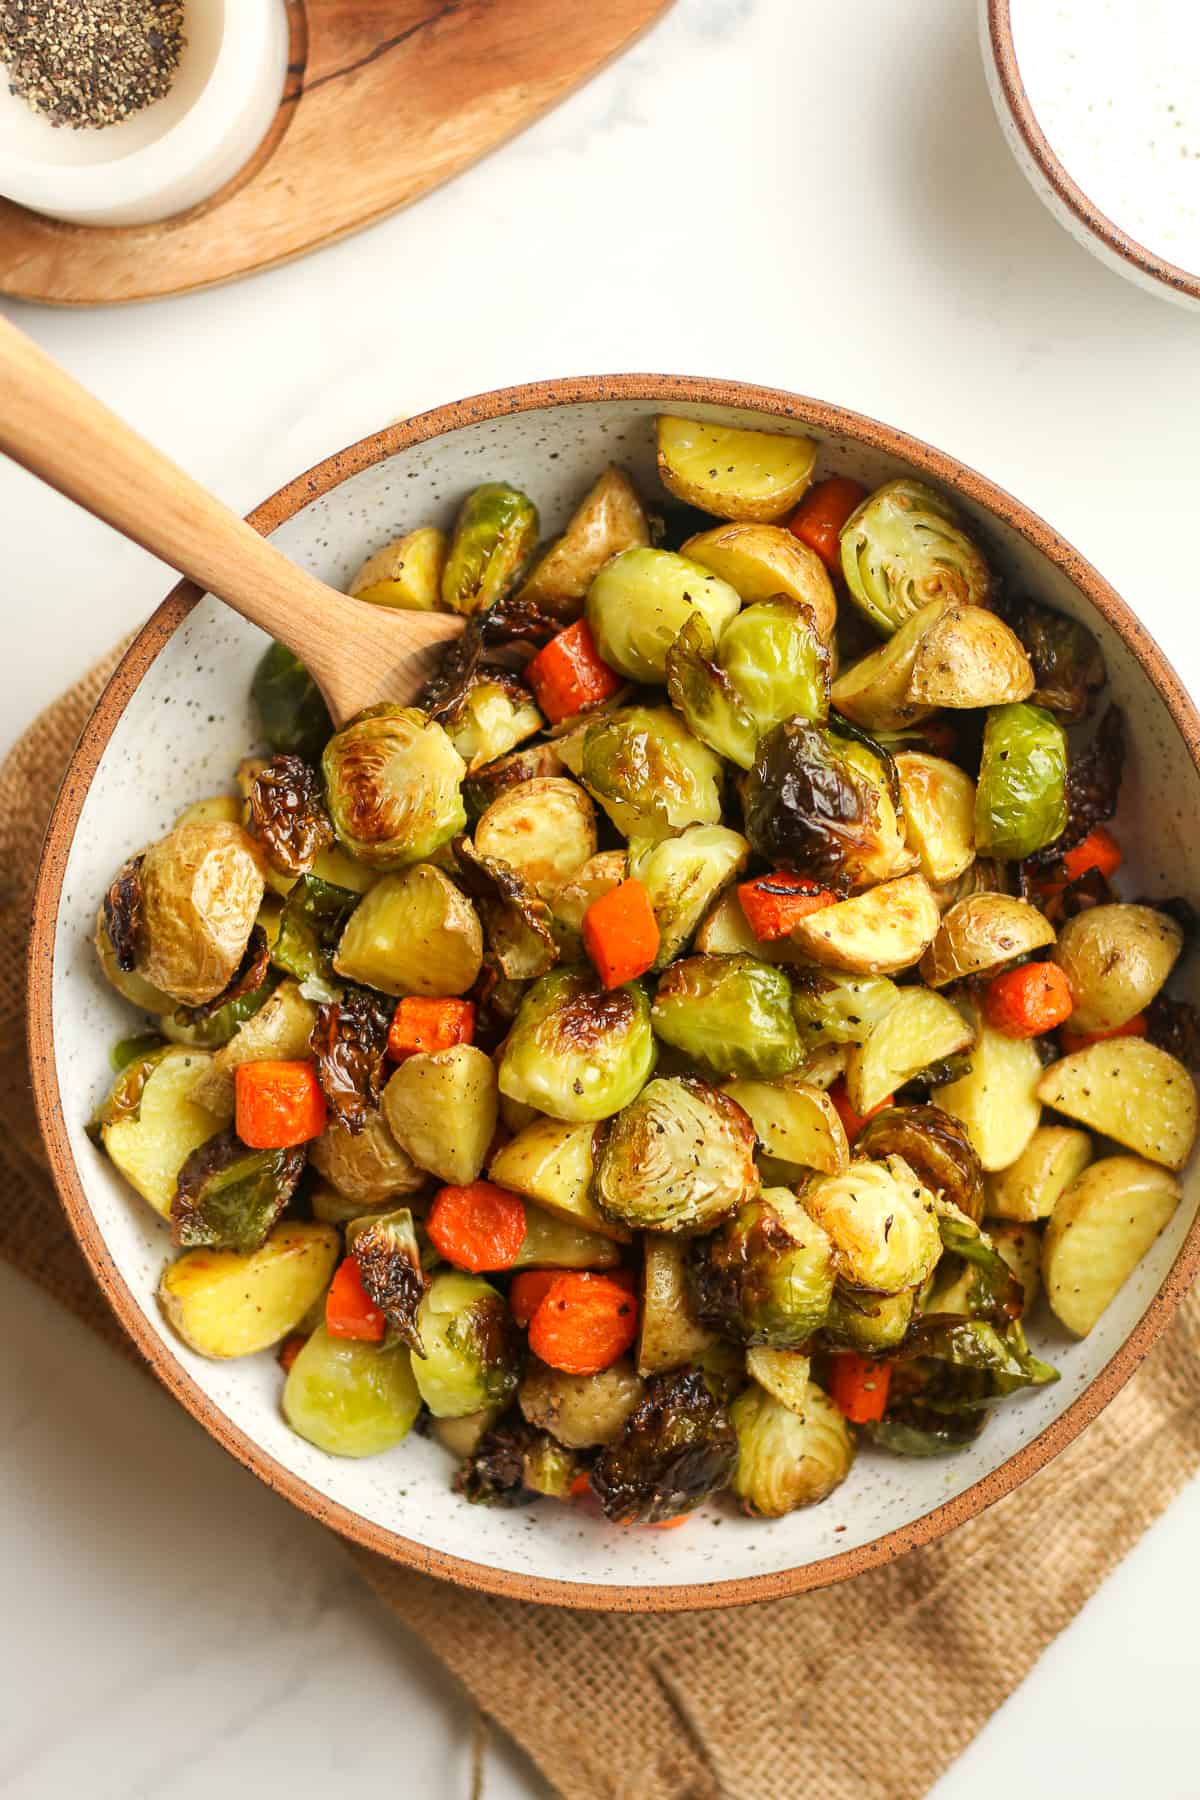 Roasted Potatoes, Carrots, and Brussels Sprouts